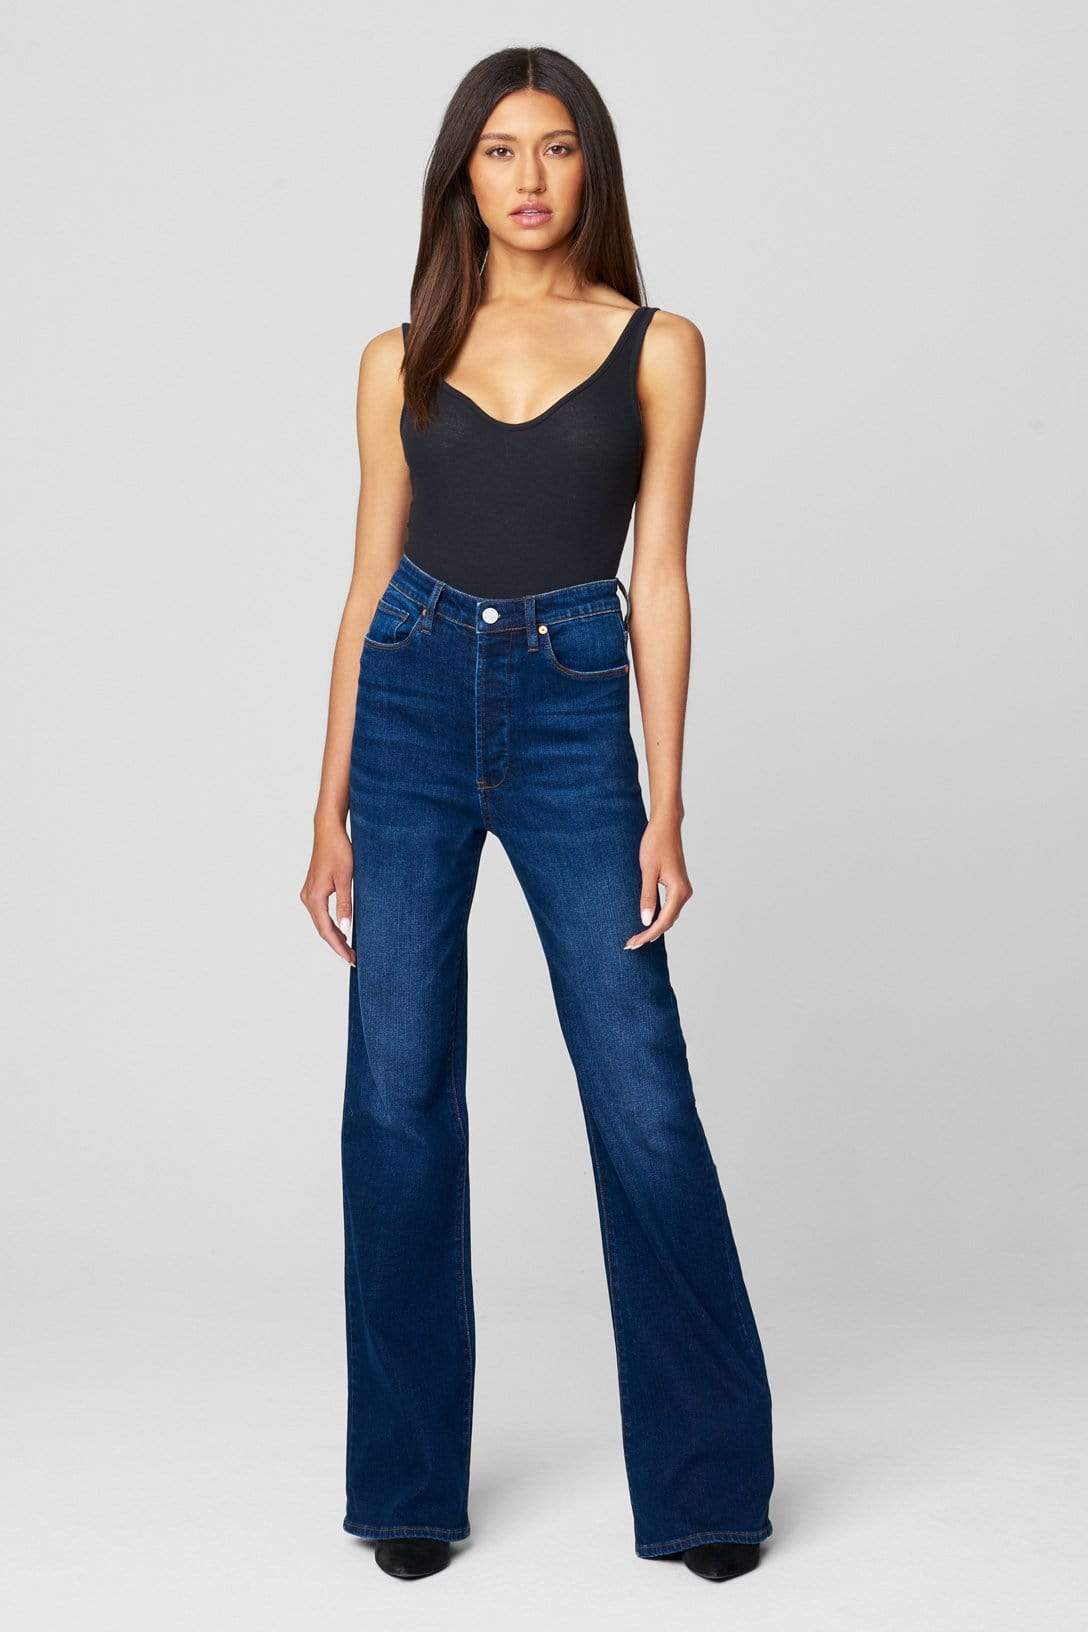 Dare To Dream Flare Denim Jean, Flare Denim by Blank NYC | LIT Boutique